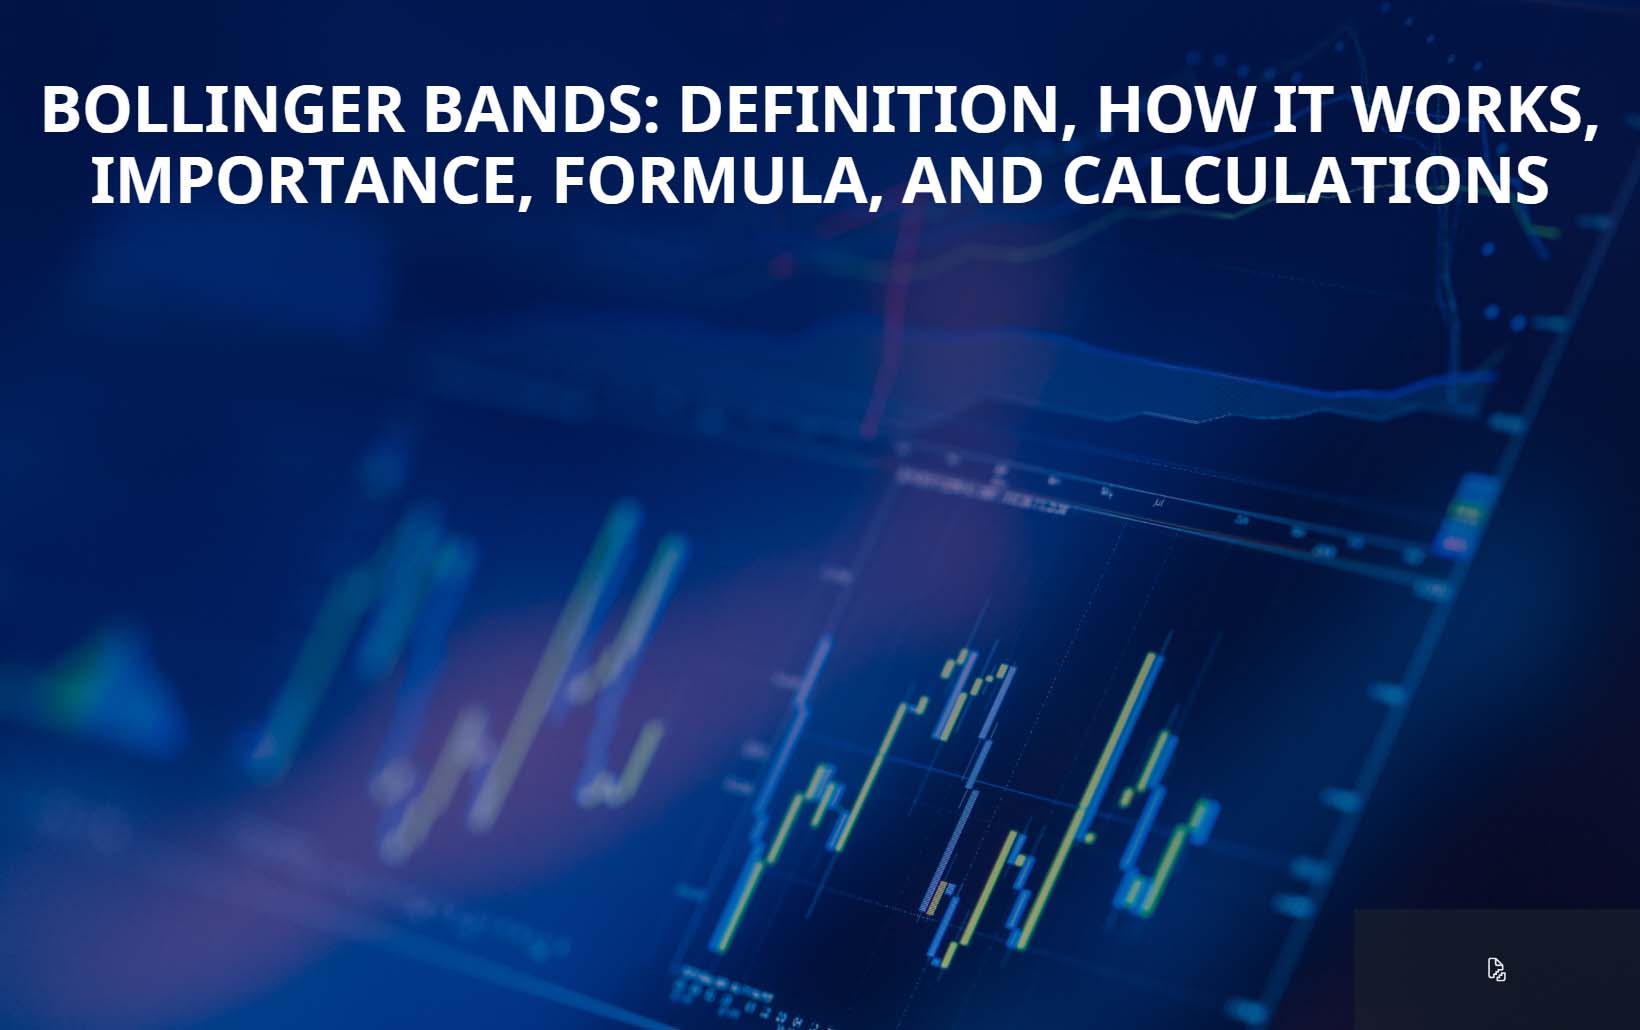 Bollinger Bands: Definition, How it Works, Importance, Formula, and Calculations